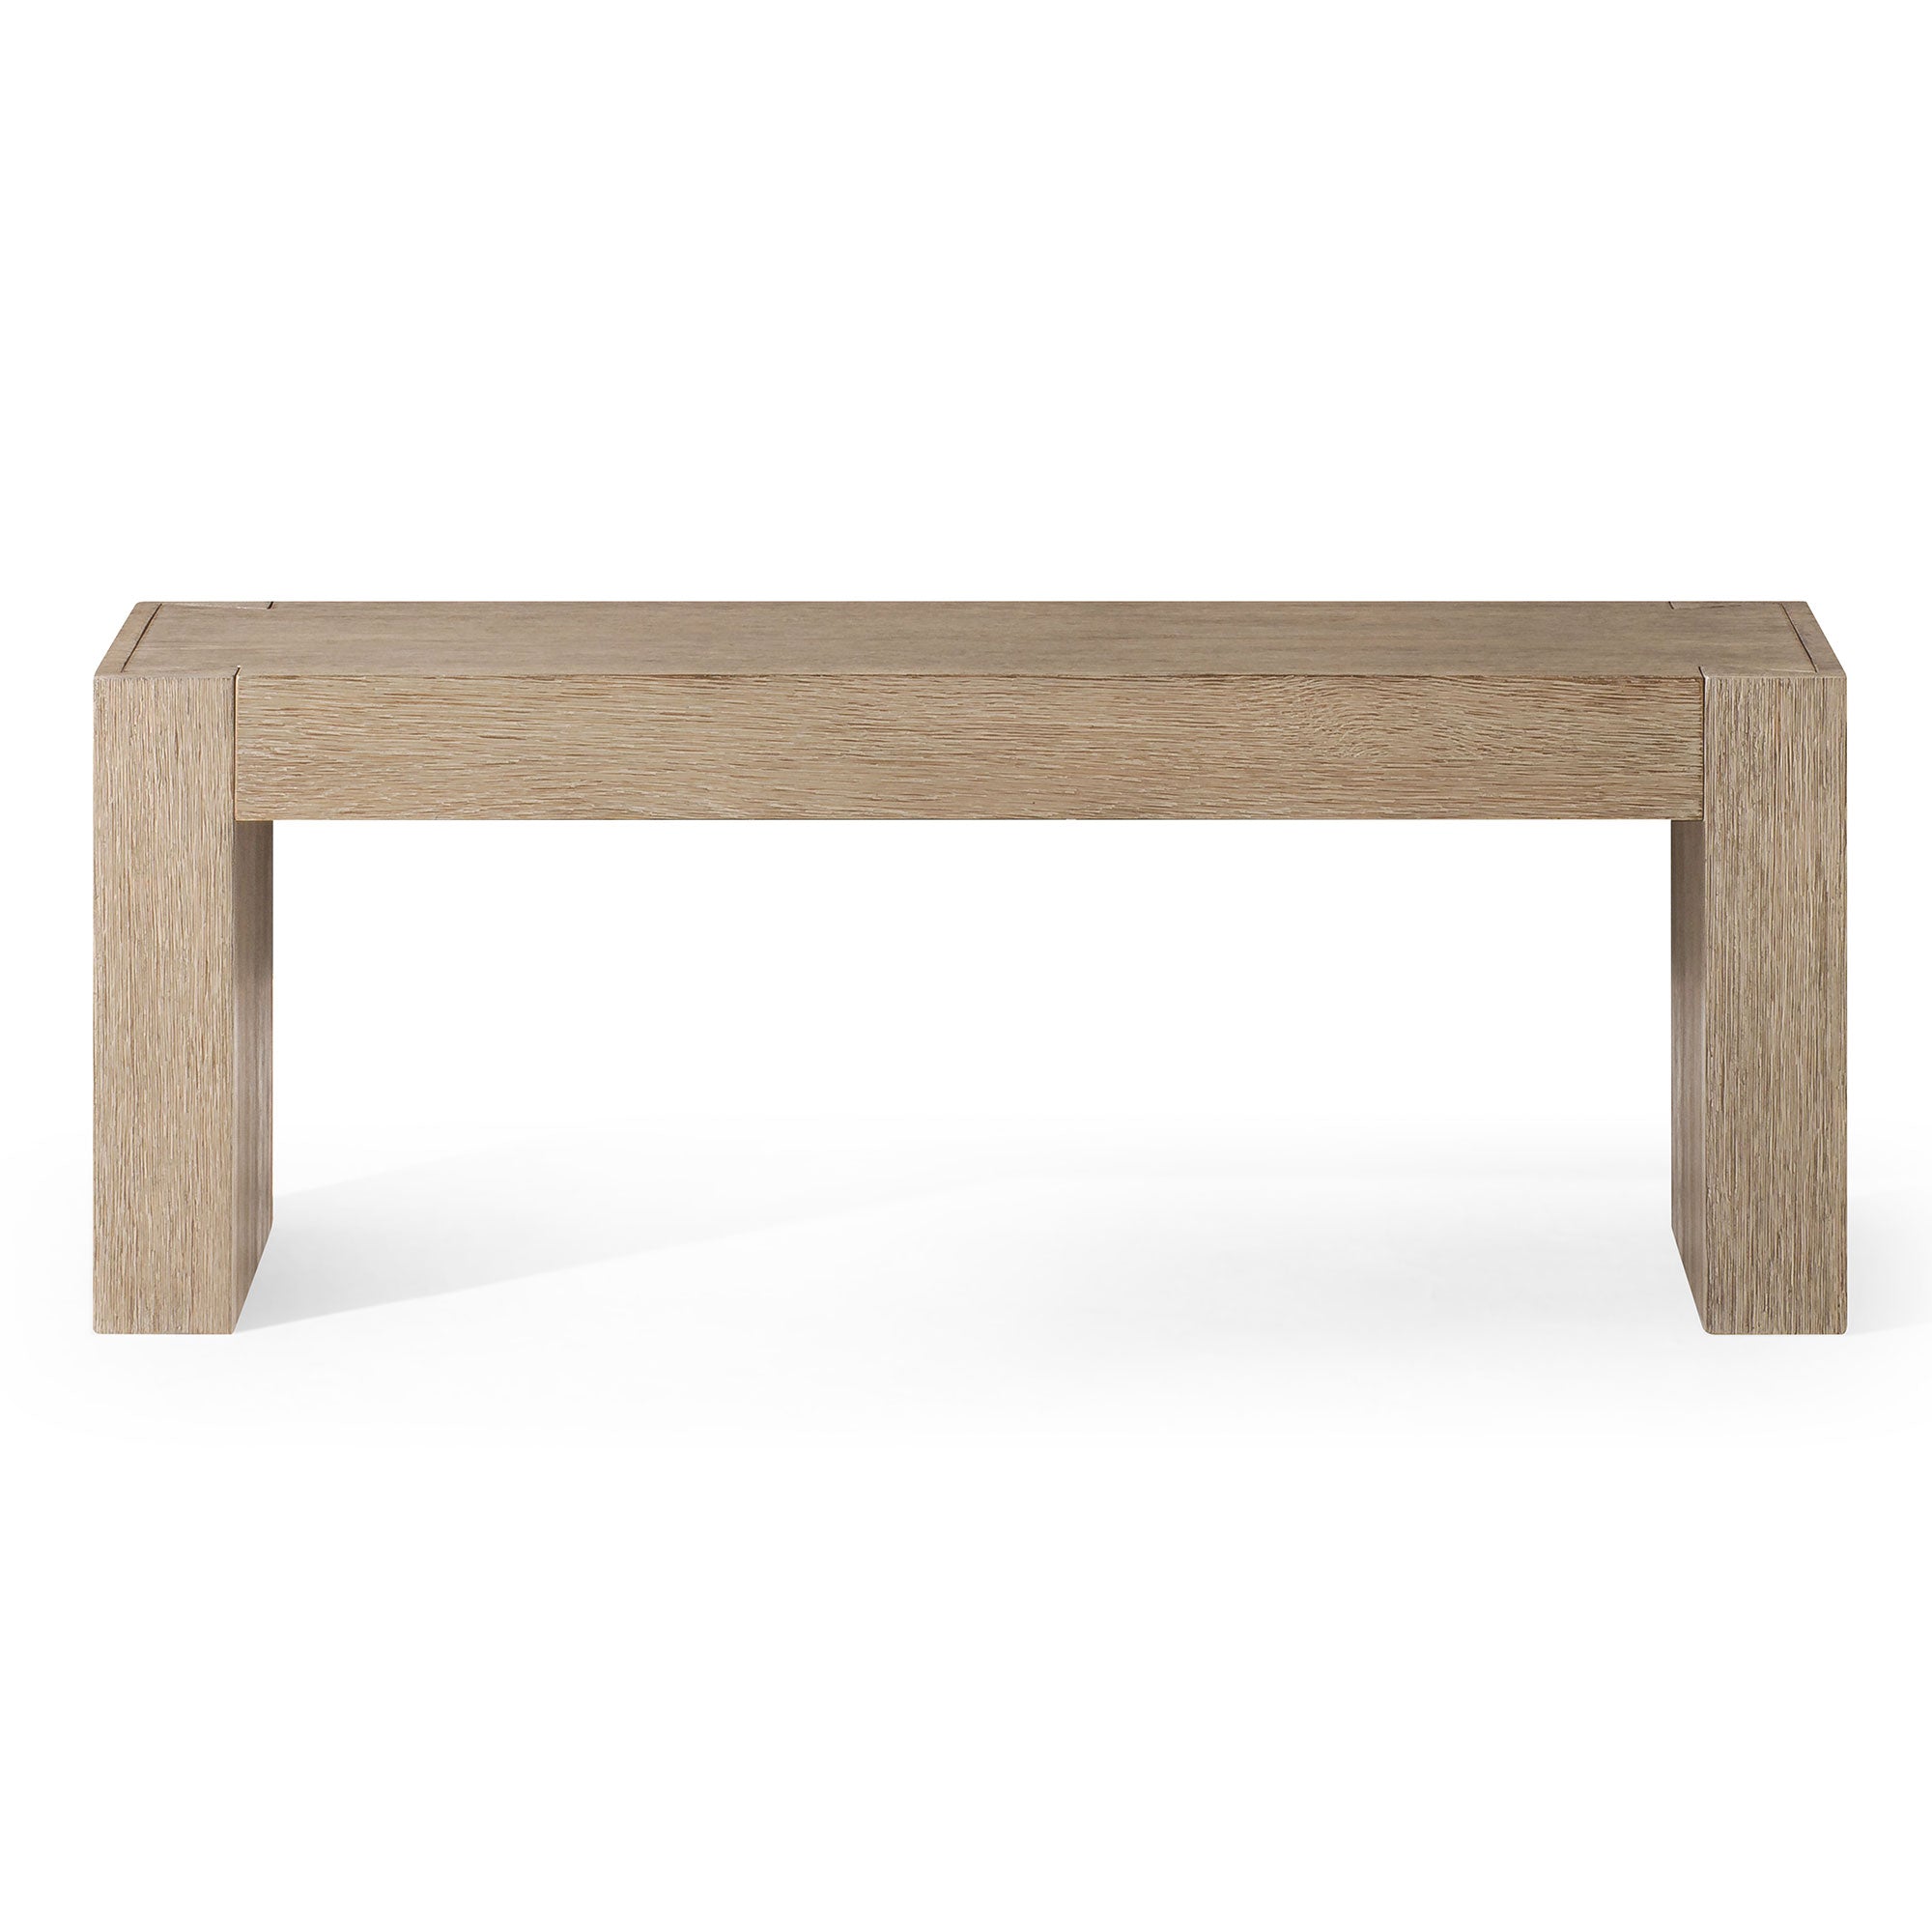 Zeno Contemporary Wooden Bench in Weathered Grey Finish